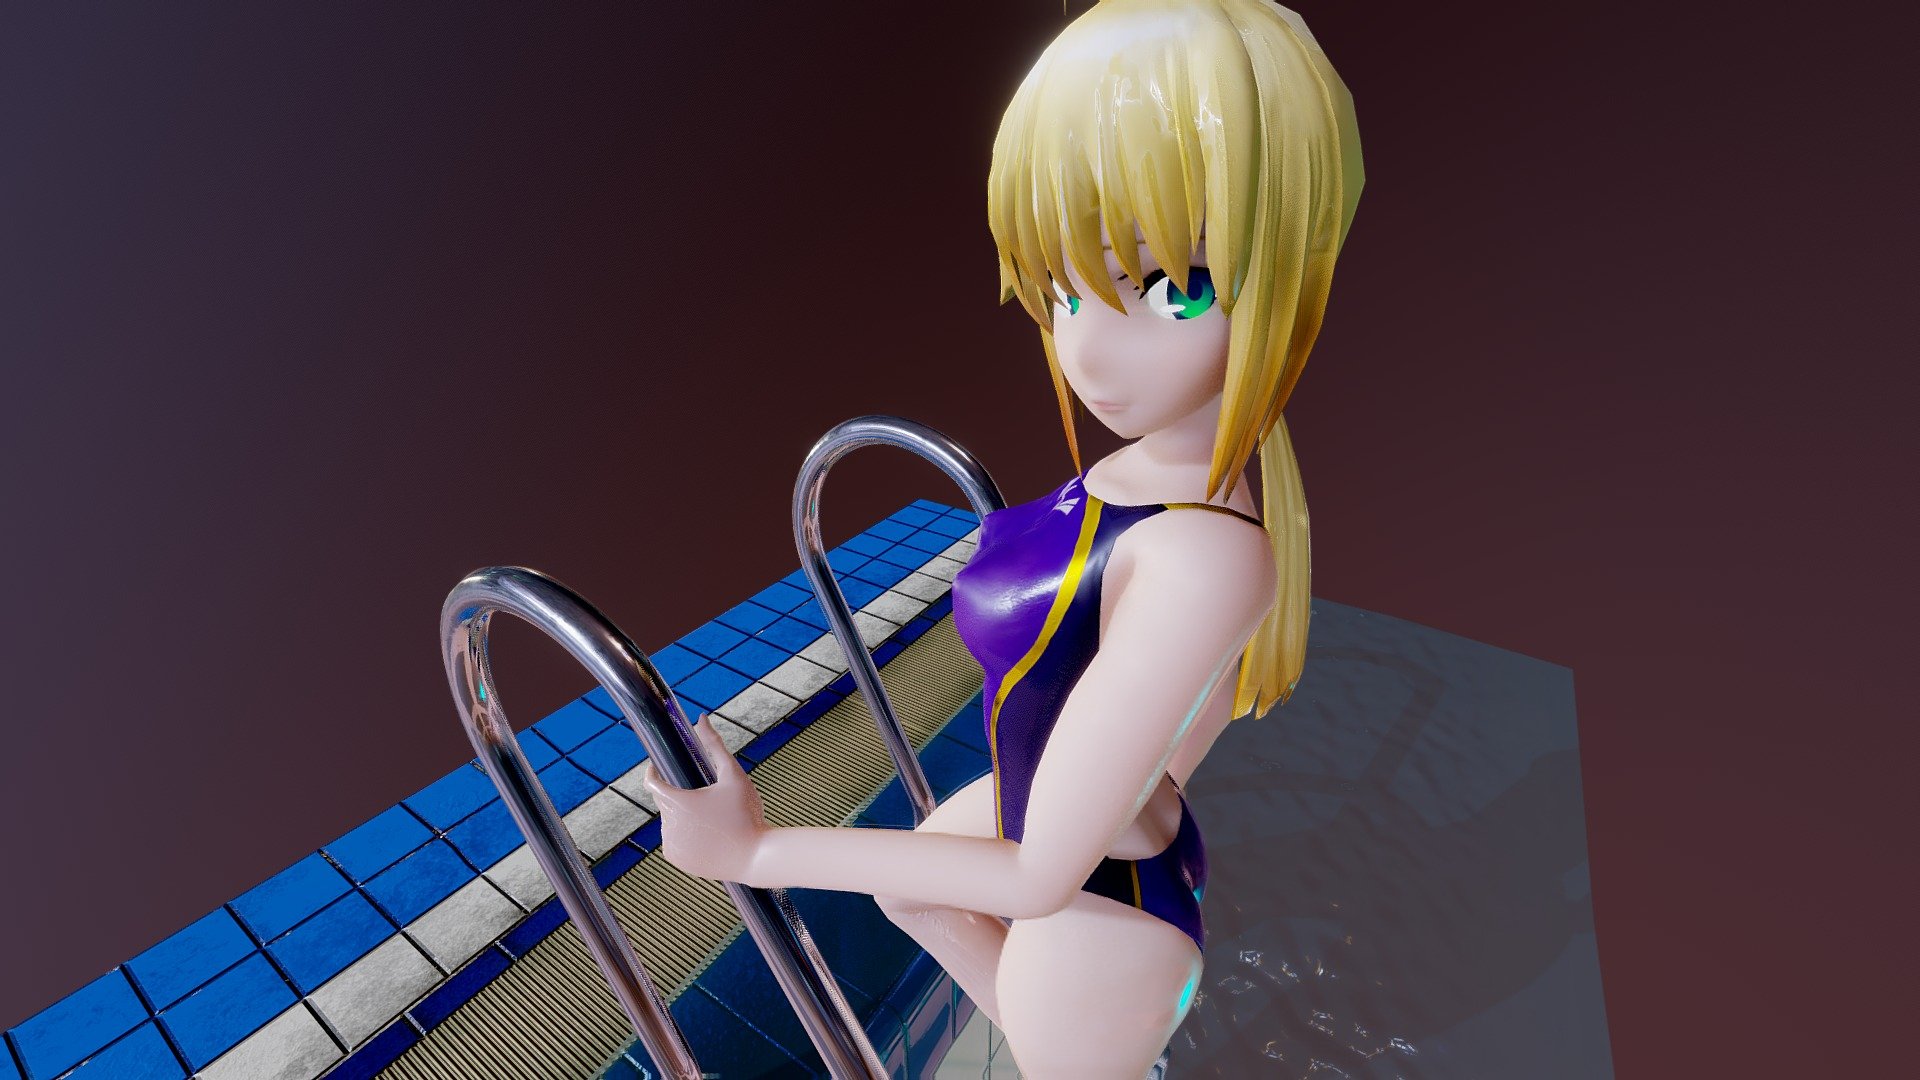 Saber is getting out of a swimming pool and is wondering what you are staring at. It's summer time, so I thought I would do a swimsuit model or two. They are pretty nice 3d model